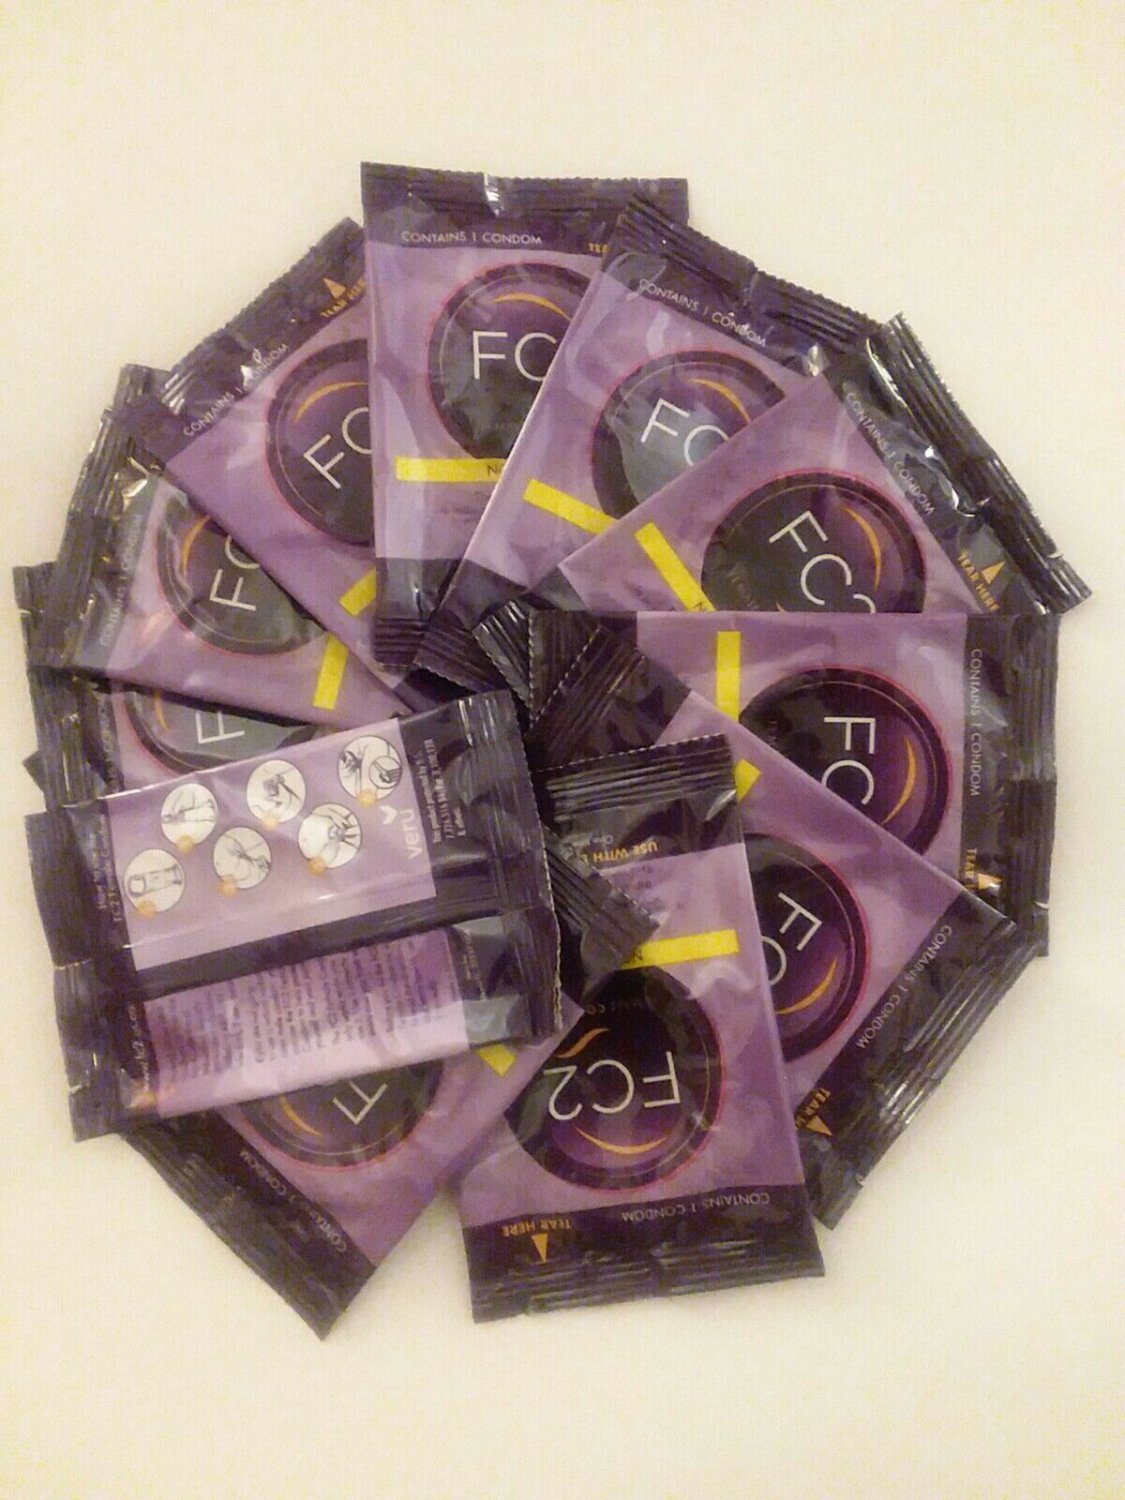 Fc2 Female Condoms 20 Pack Comes With Dolphin Vibrator Added 0951